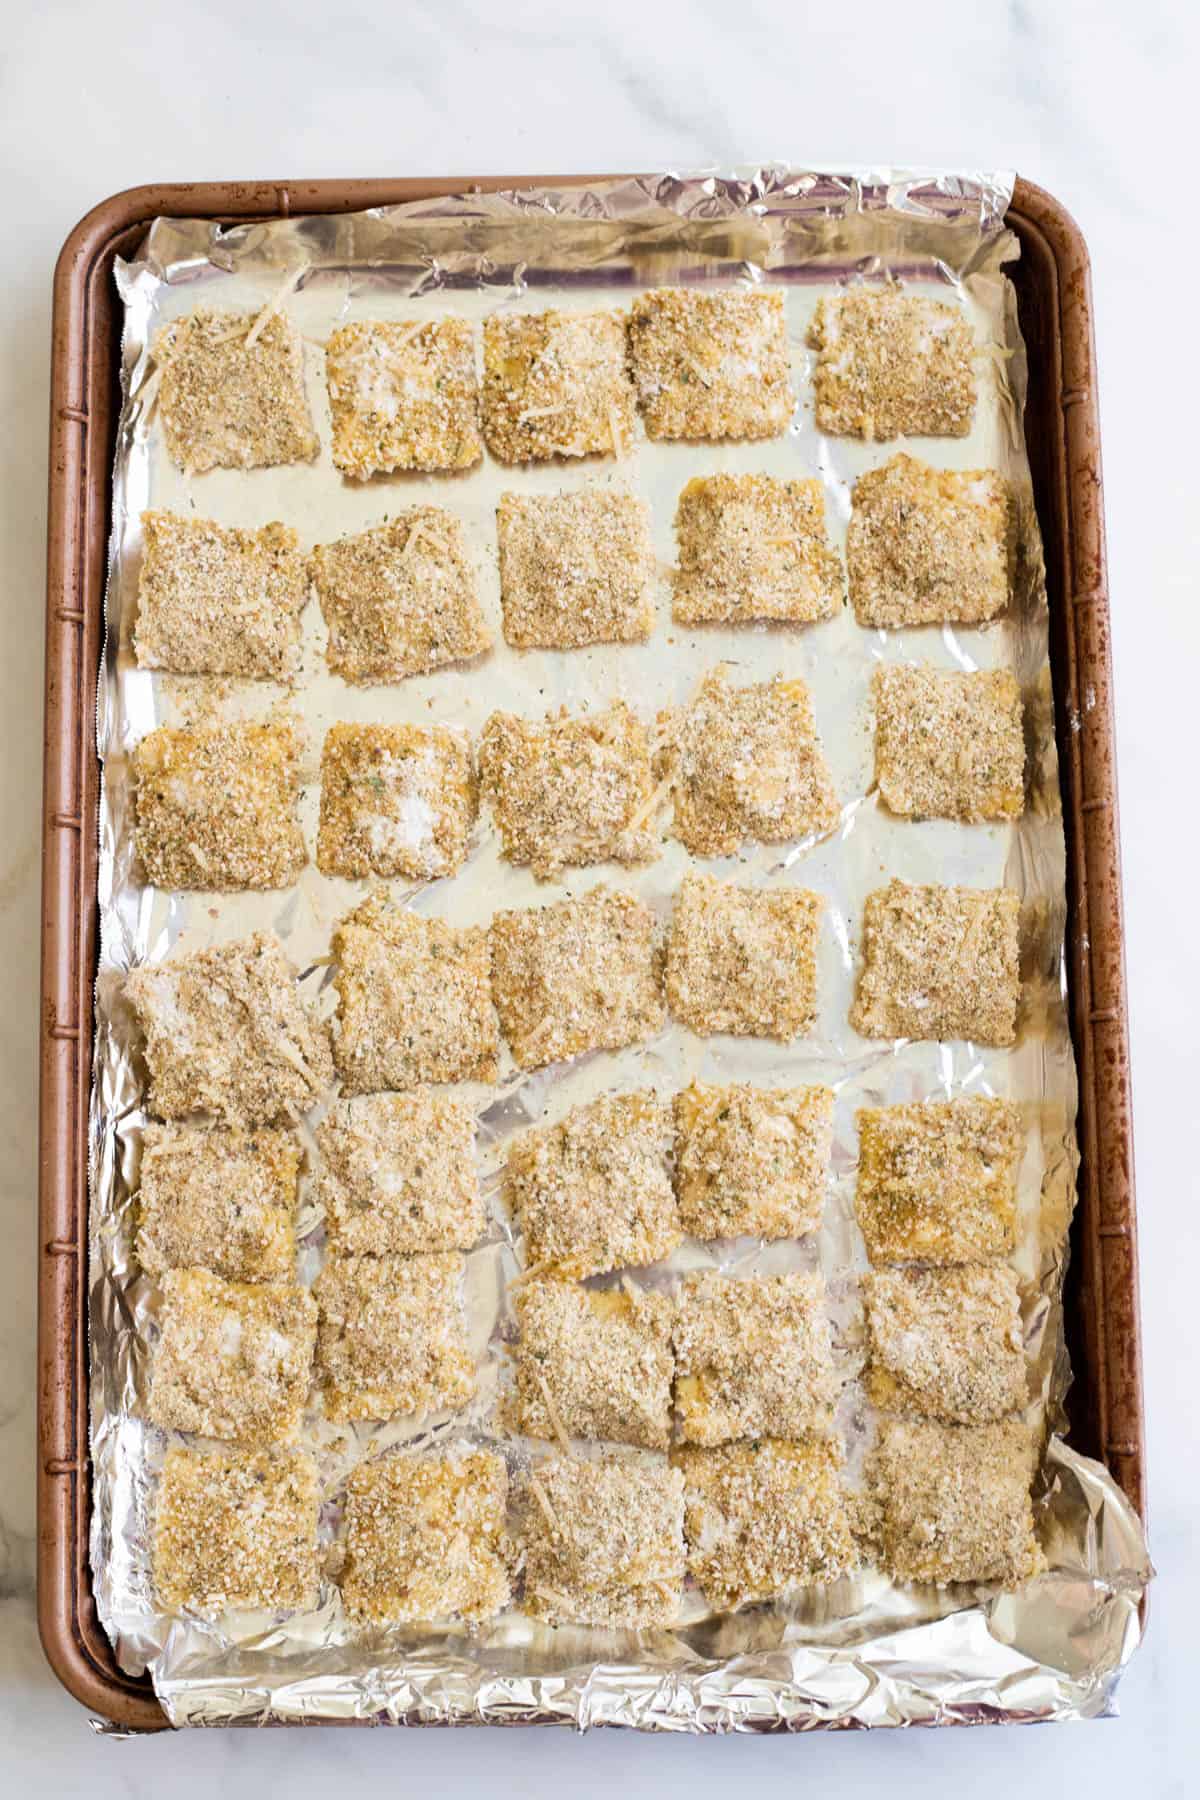 Breaded ravioli lined up on a baking sheet.